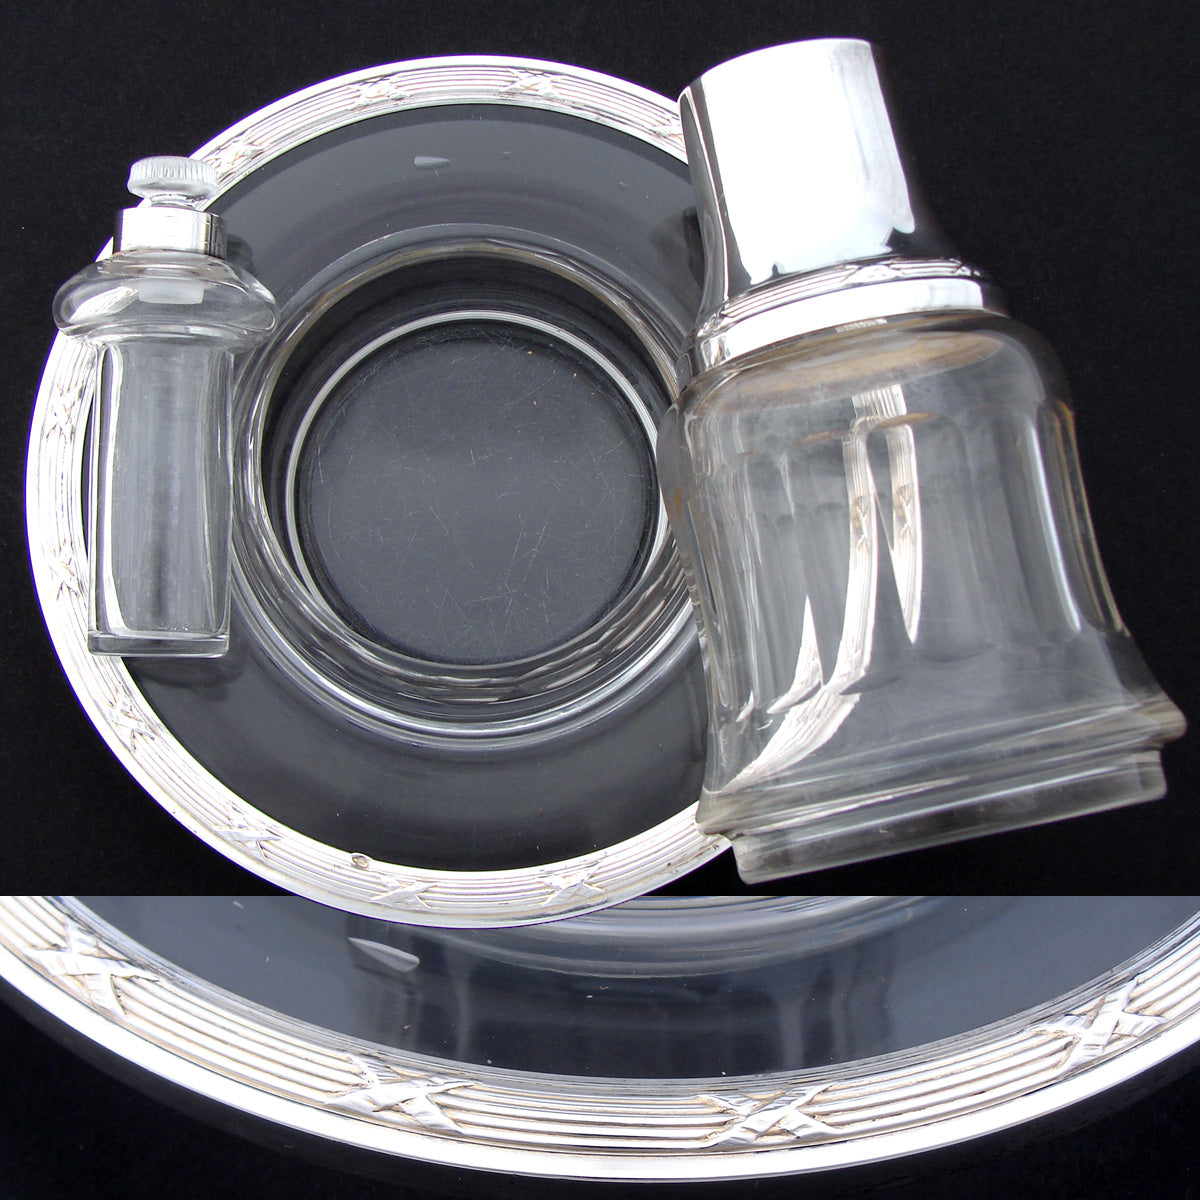 Antique French Sterling Silver & Cut Glass Bonne Nuit Decanter Set, Flask & Tray